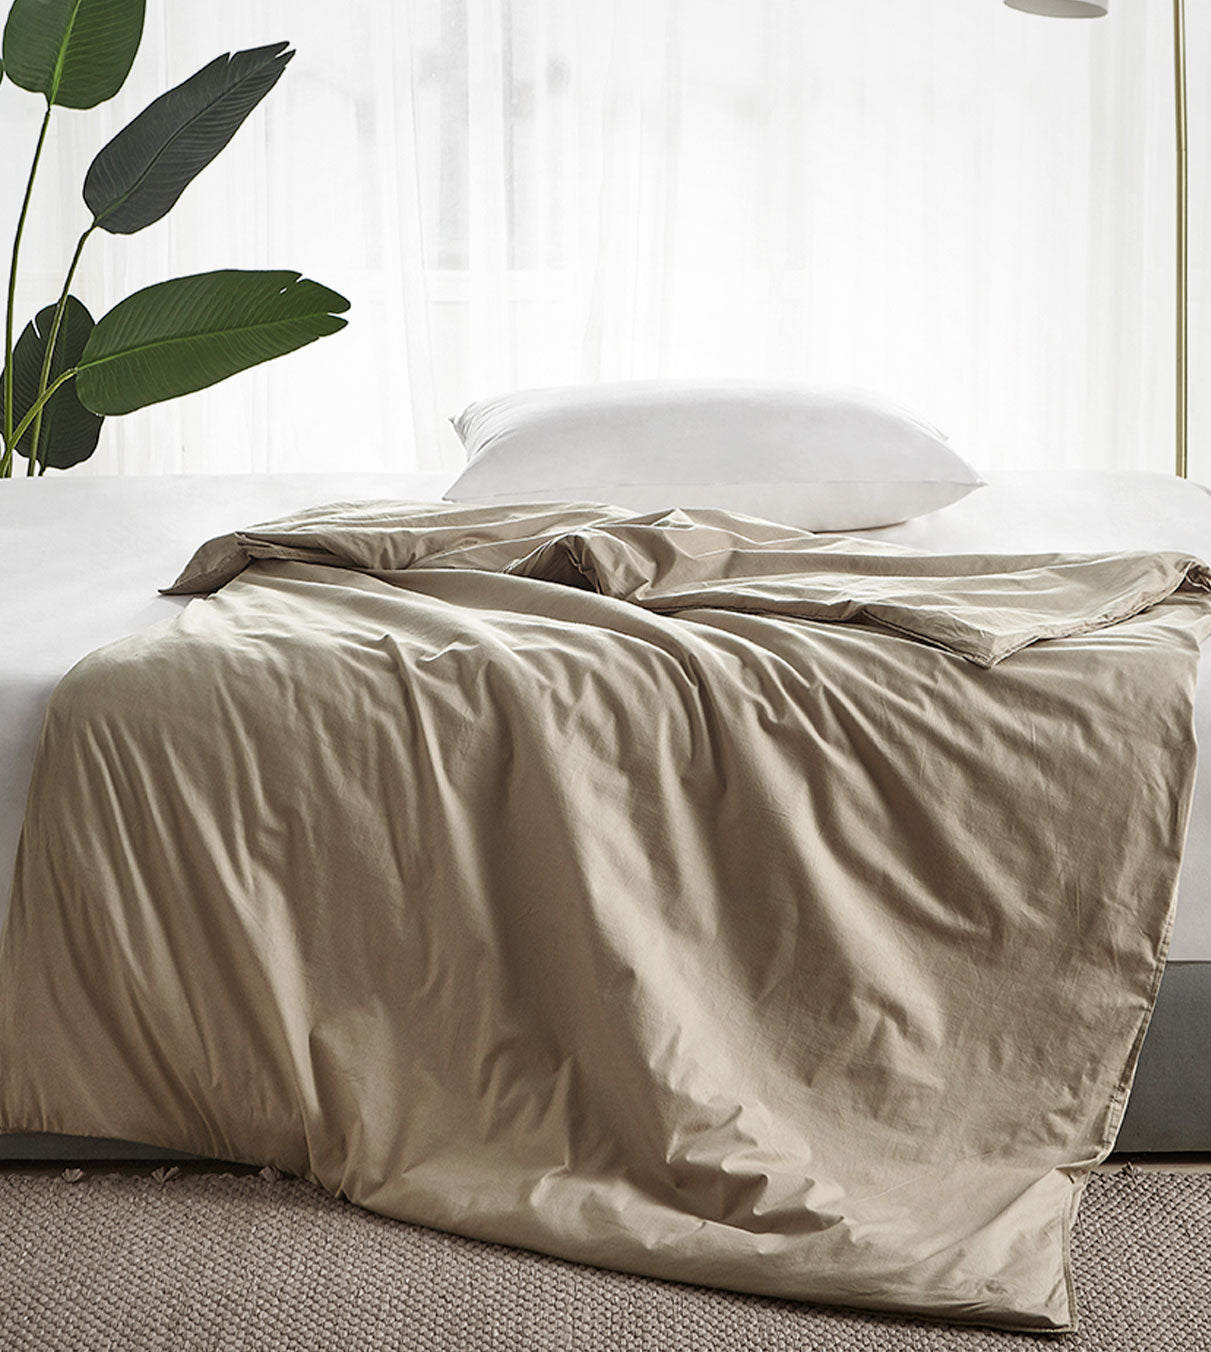 Product: Cotton Weighted Blanket Duvet Cover | Color: Sand